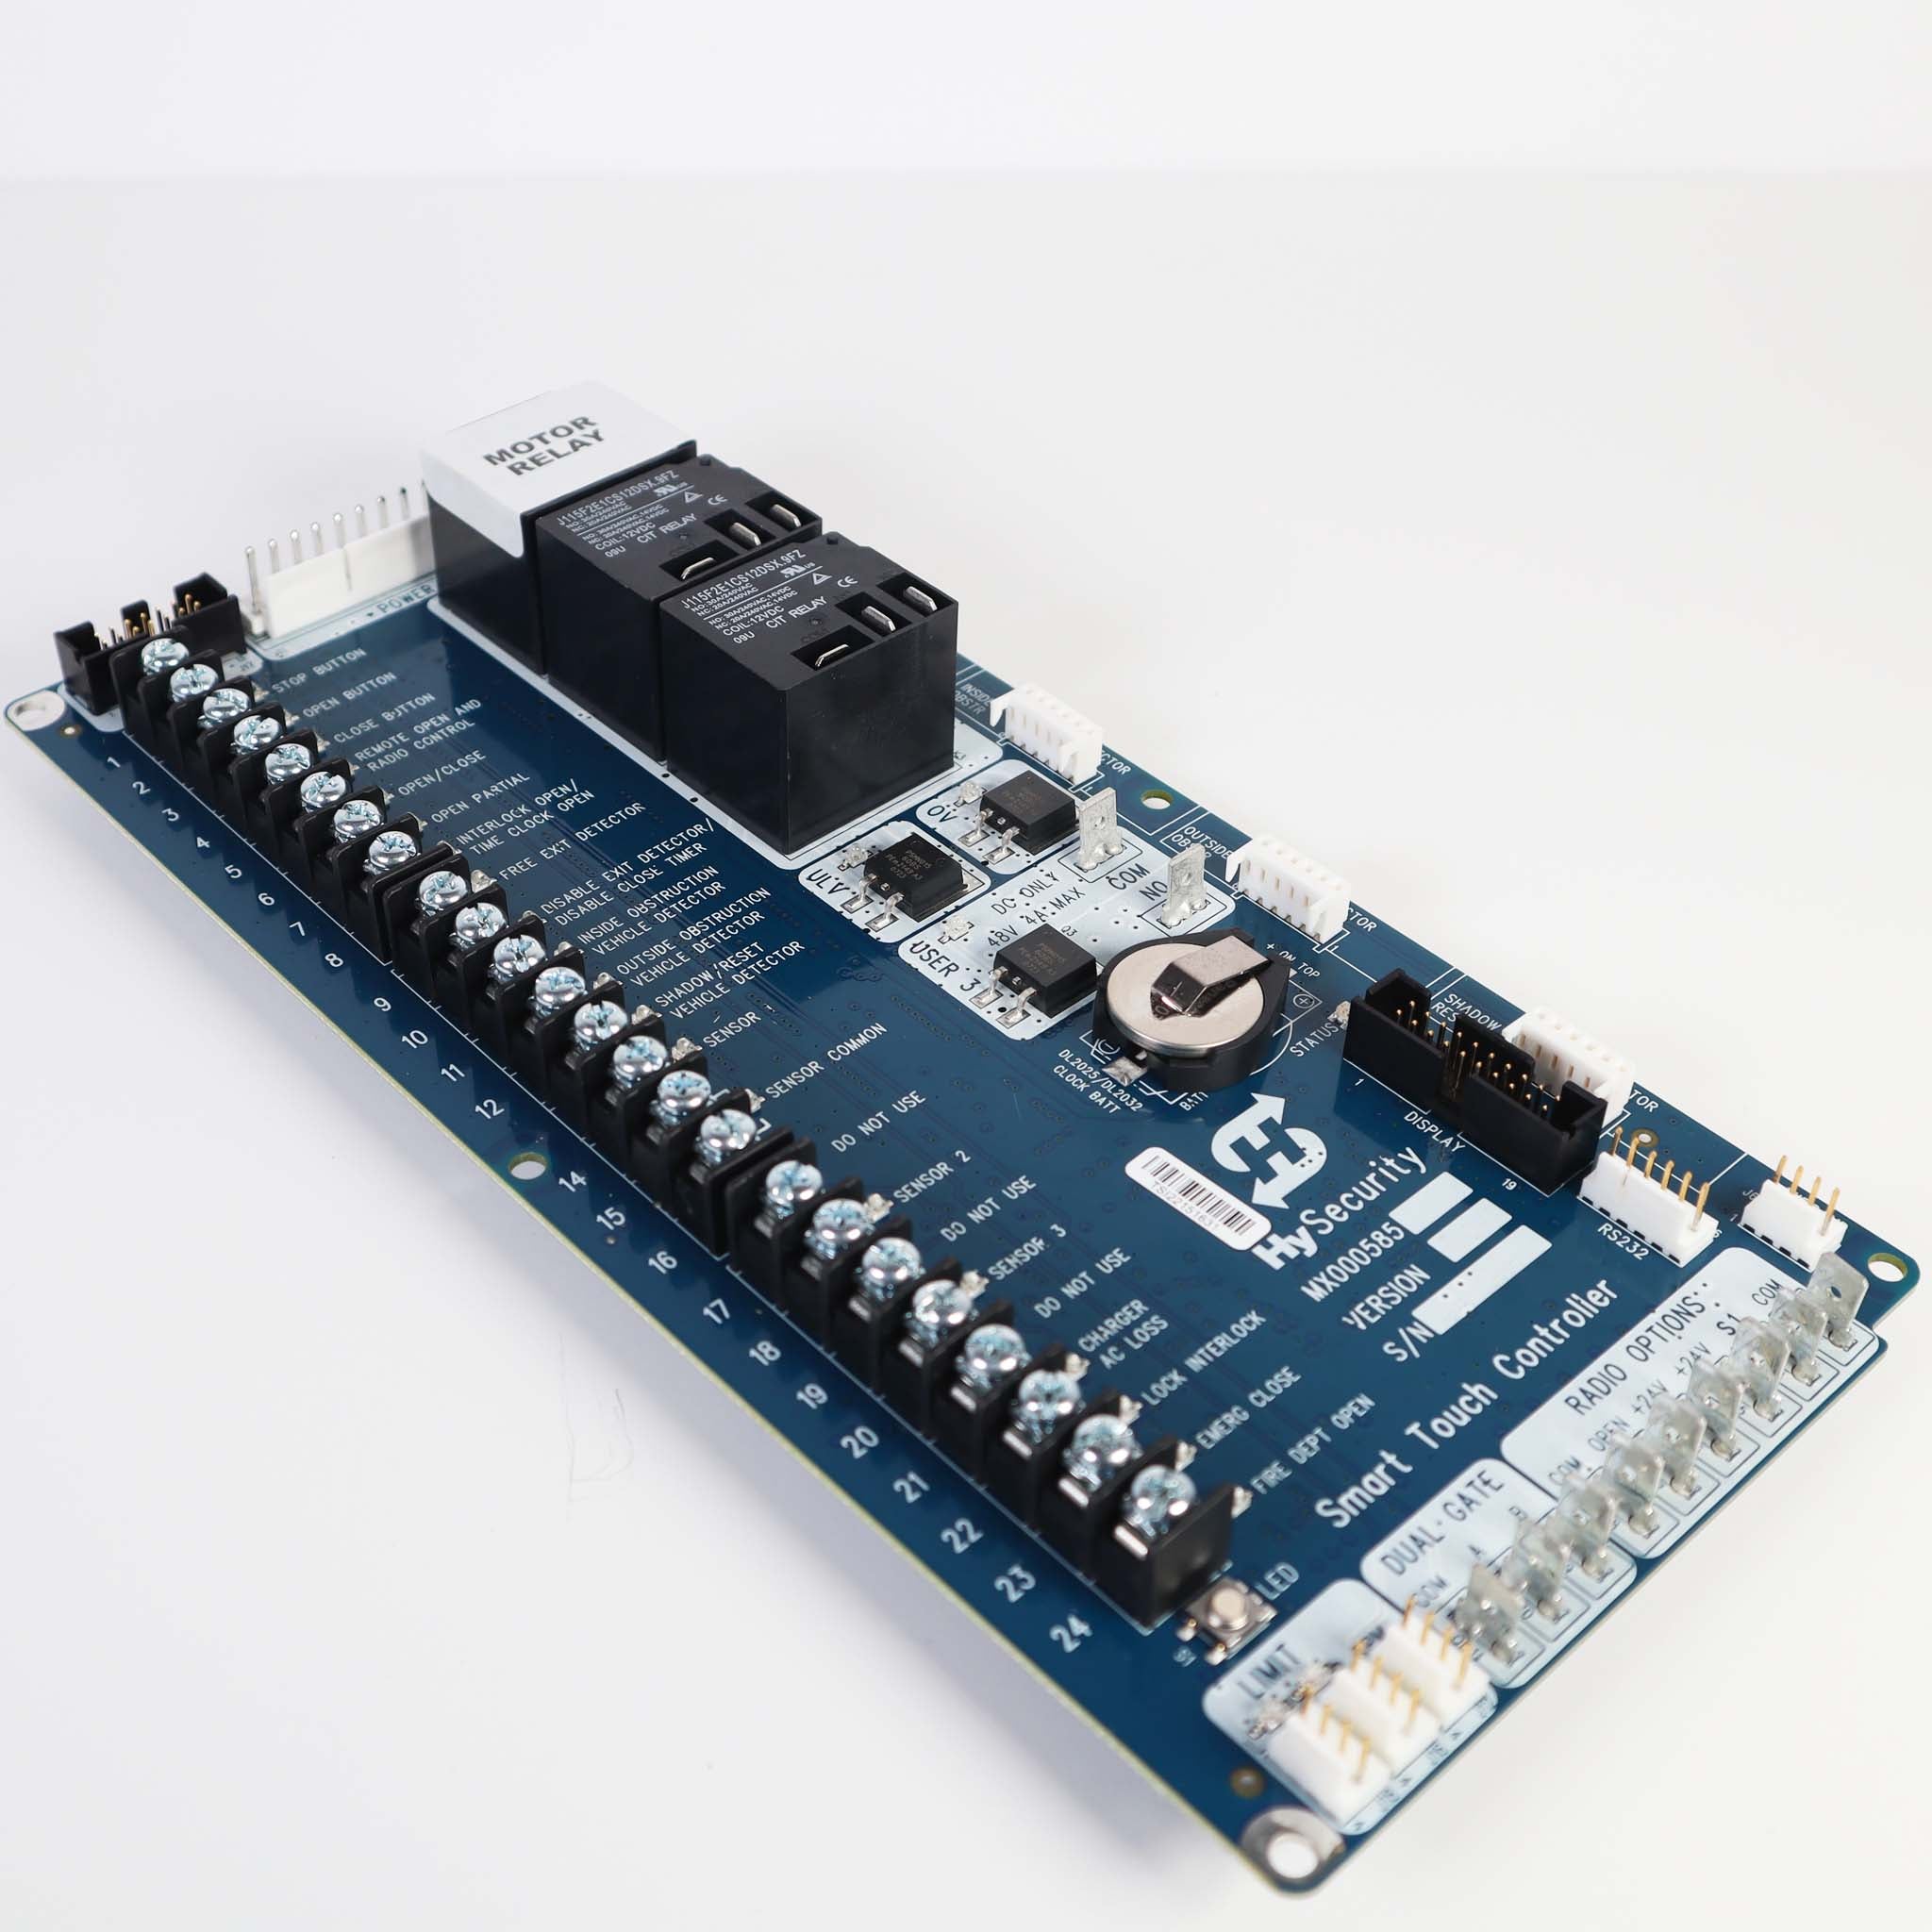 Hysecurity MX000585-2 Board, Smart Touch Controller